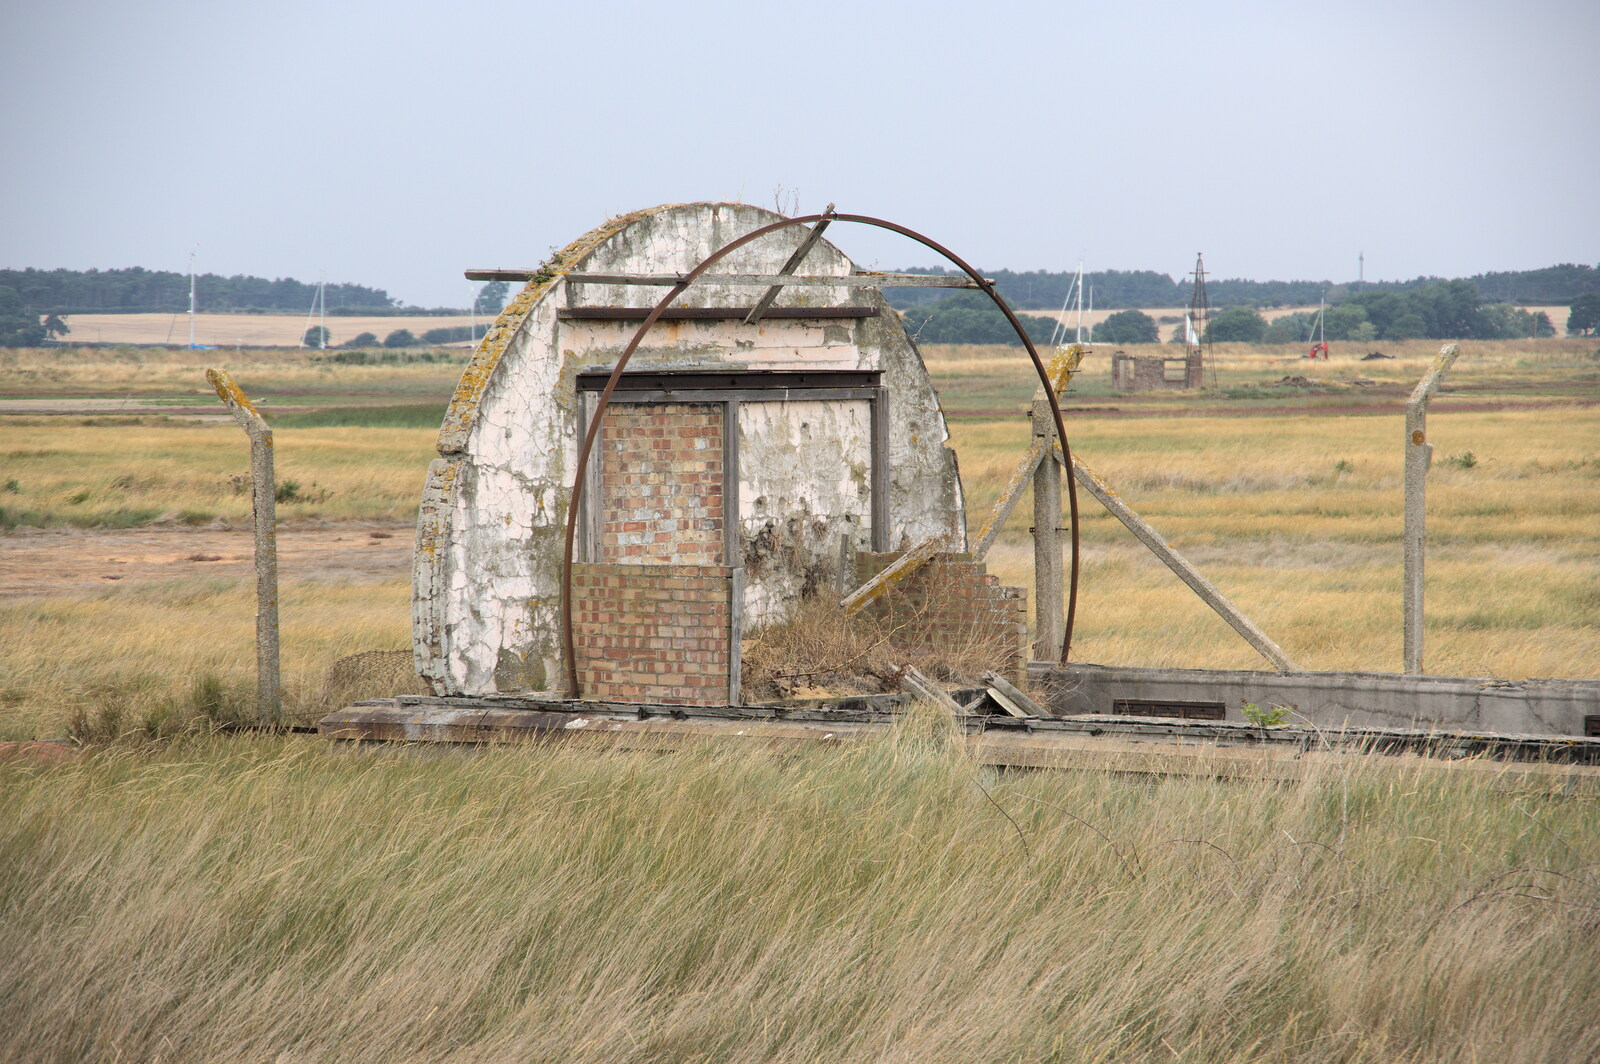 All that remains of an old Nissen hut from A Trip to Orford Ness, Orford, Suffolk - 16th August 2022